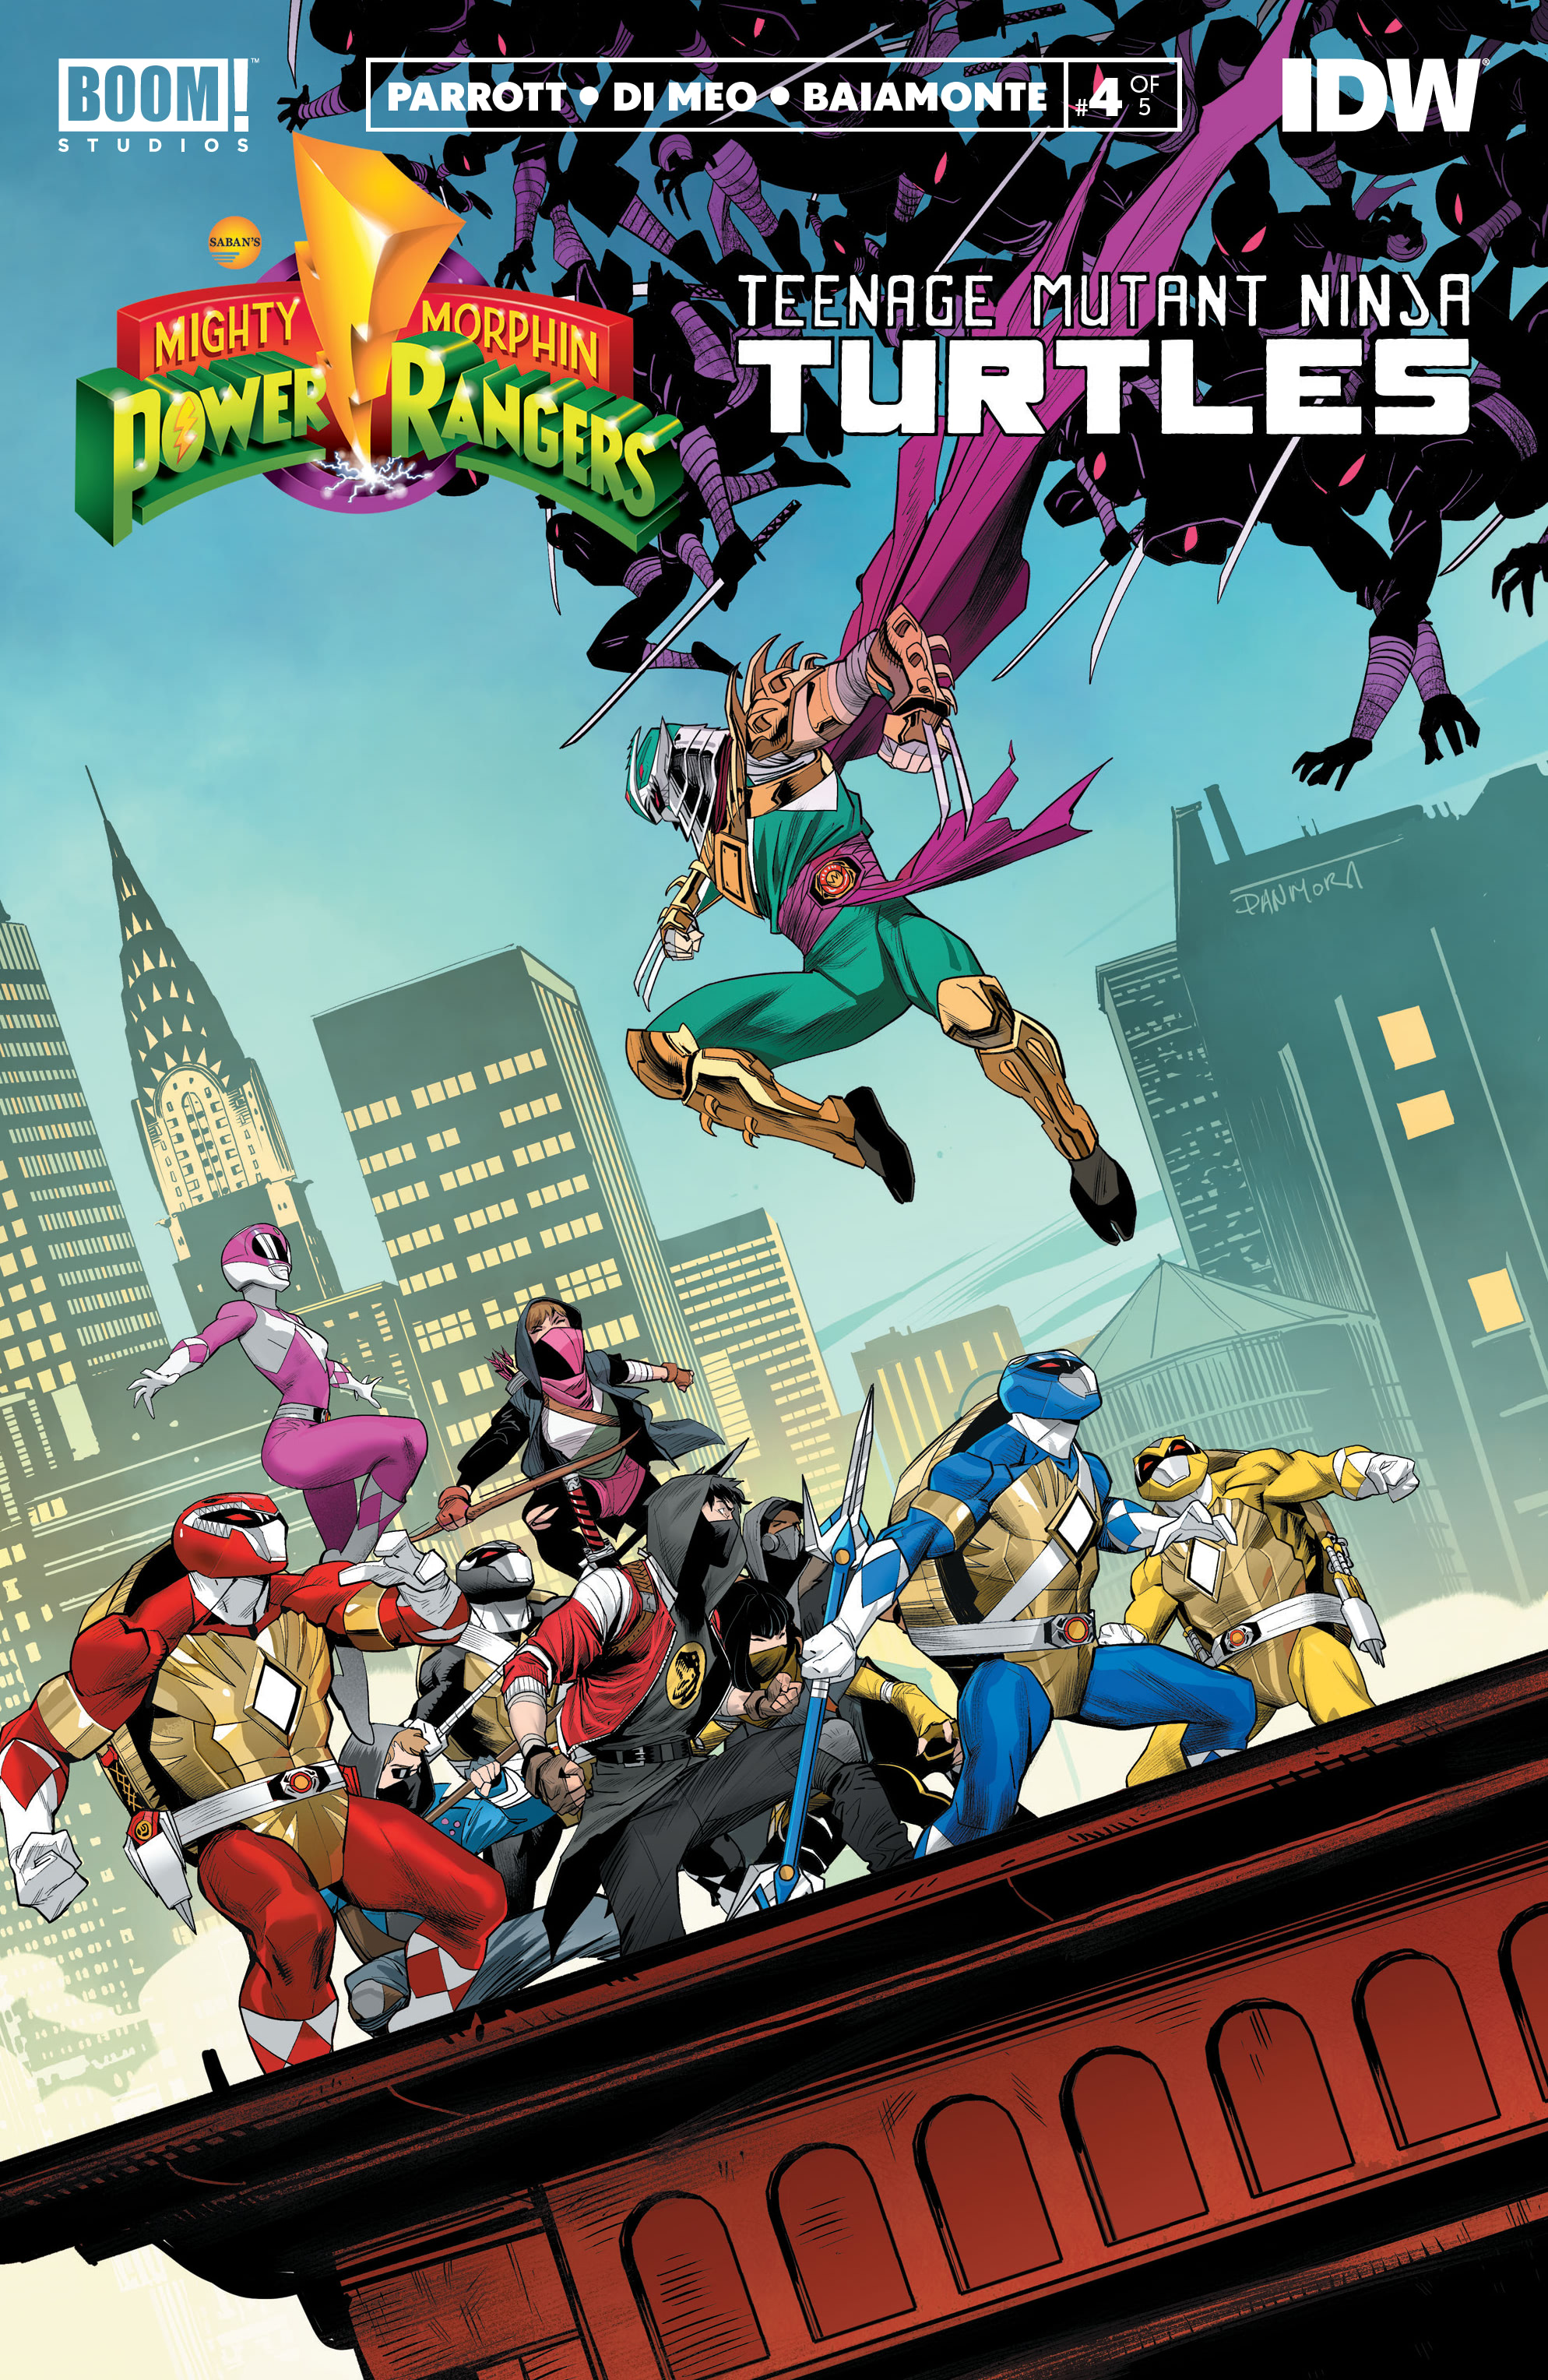 Mighty Morphin Power Rangers Teenage Mutant Ninja Turtles Issue 4 | Read  Mighty Morphin Power Rangers Teenage Mutant Ninja Turtles Issue 4 comic  online in high quality. Read Full Comic online for